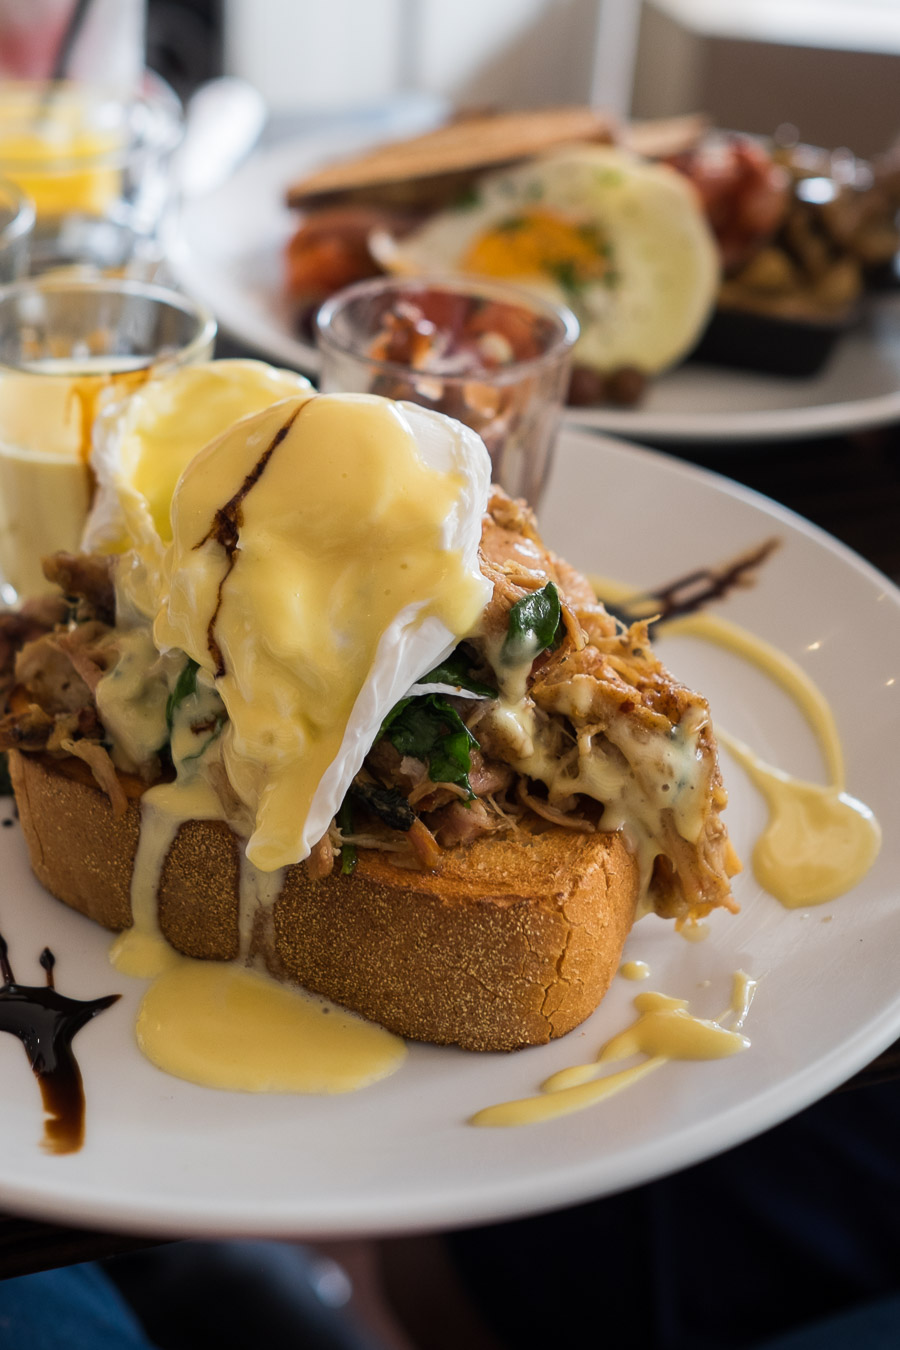 Pulled pork Benedict with two poached eggs, wilted spinach, onion jam, hollandaise and thick toast (AU$19.50)